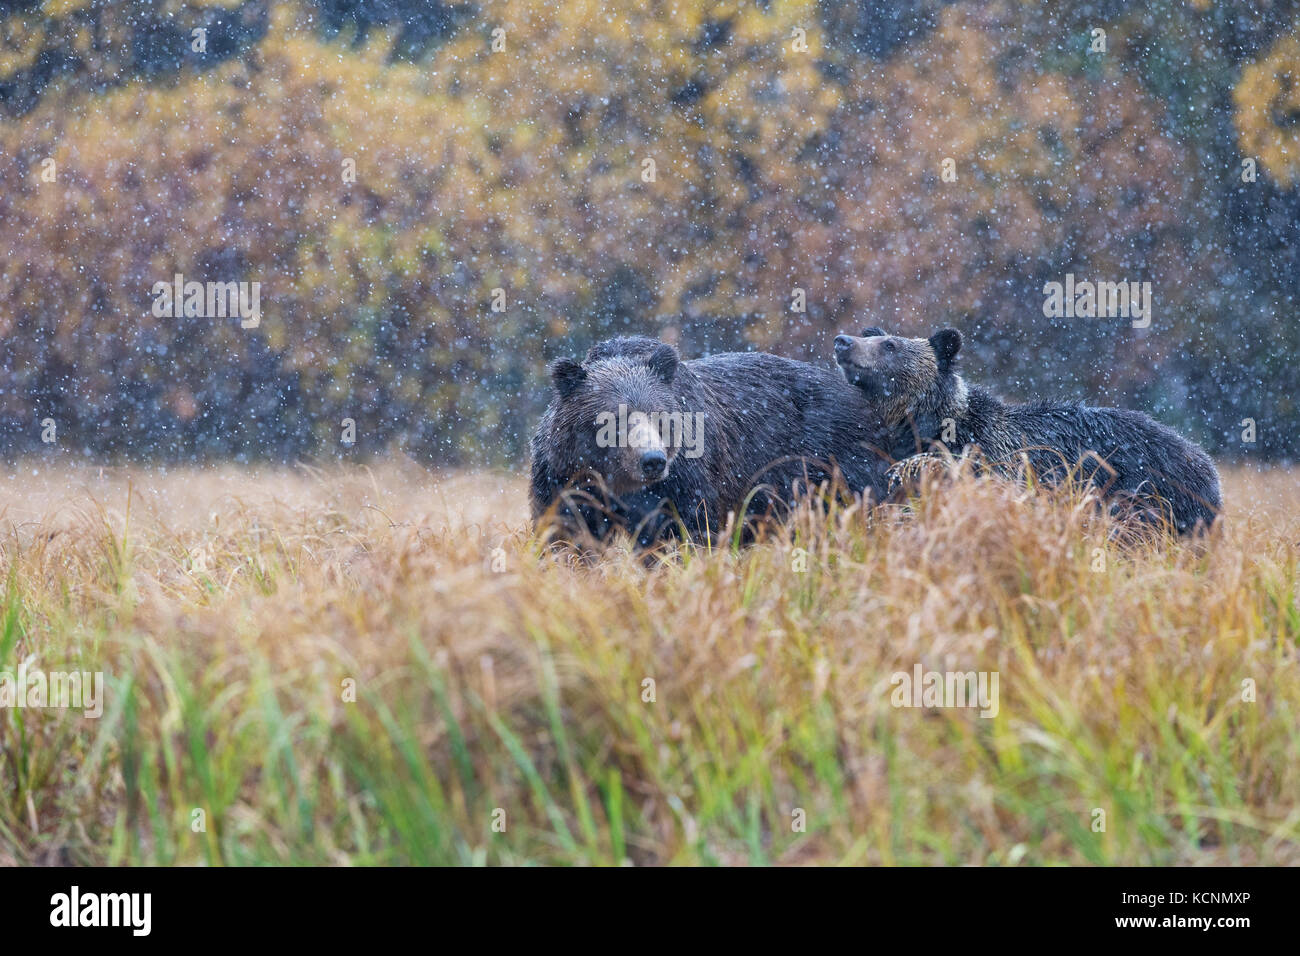 Grizzly bear (Ursus arctos horribilis), female and cub,  in early snowfall, Chilcotin Region, British Columbia, Canada. Stock Photo